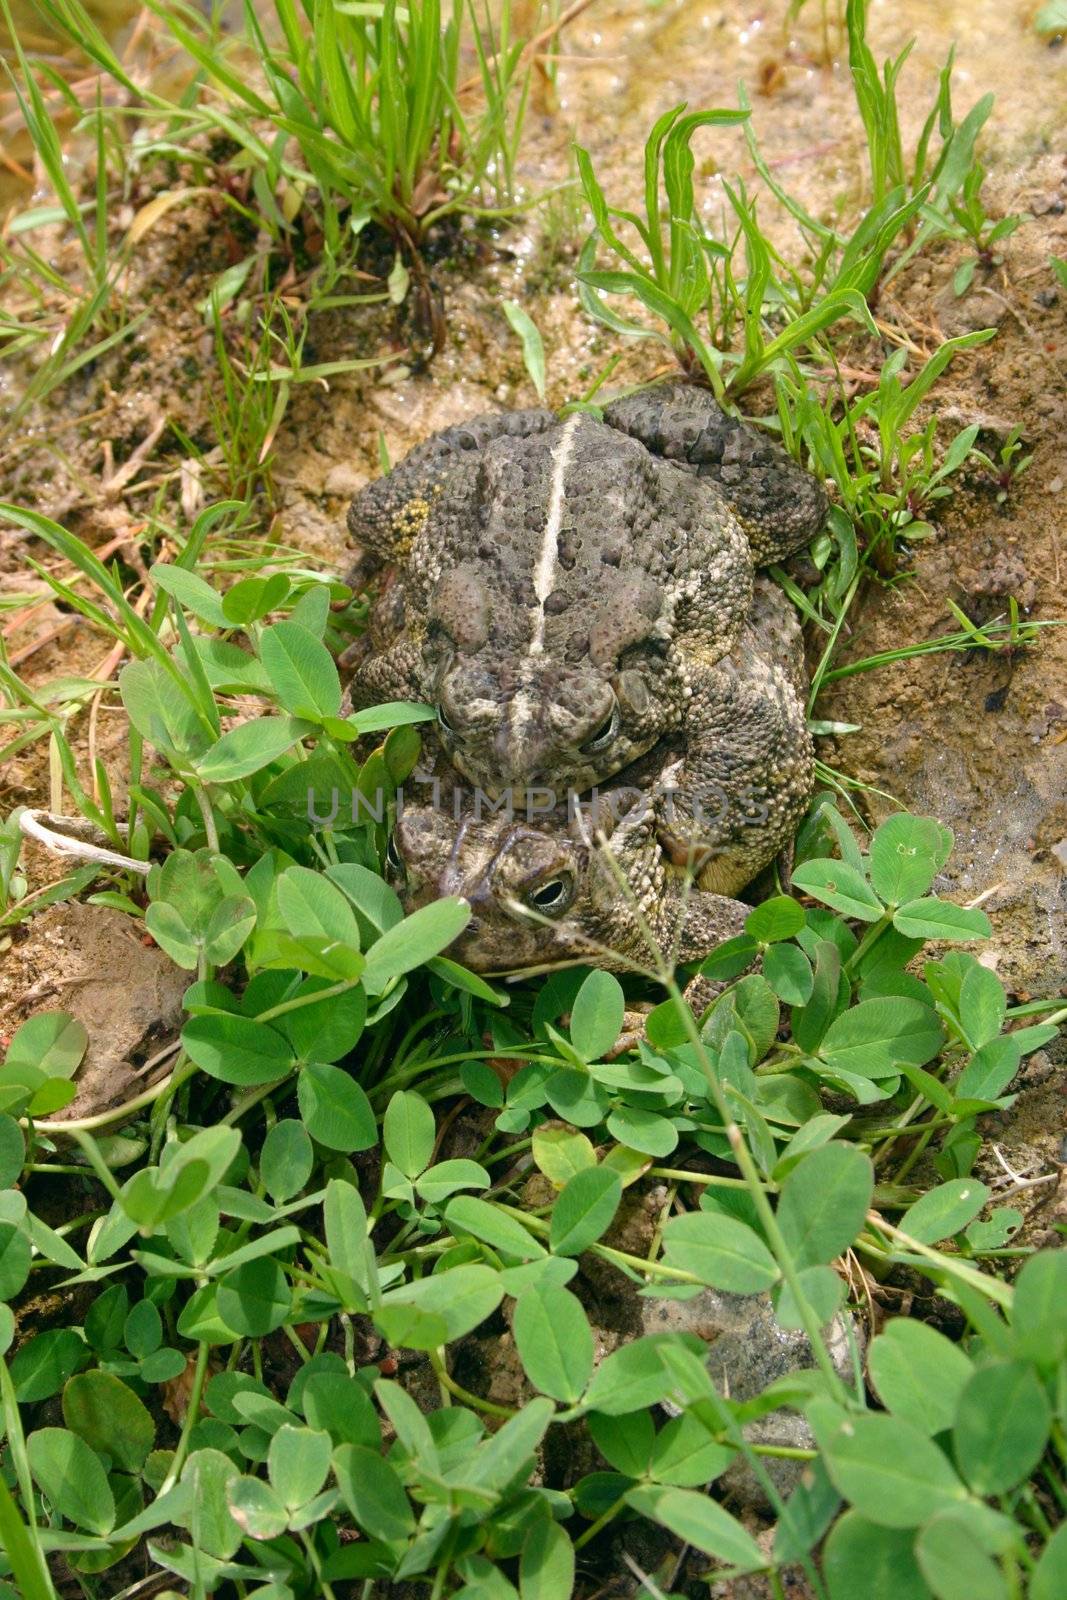 Woodhouse's Toads (Bufo woodhousii) are distinguished by the white stripe down their backs